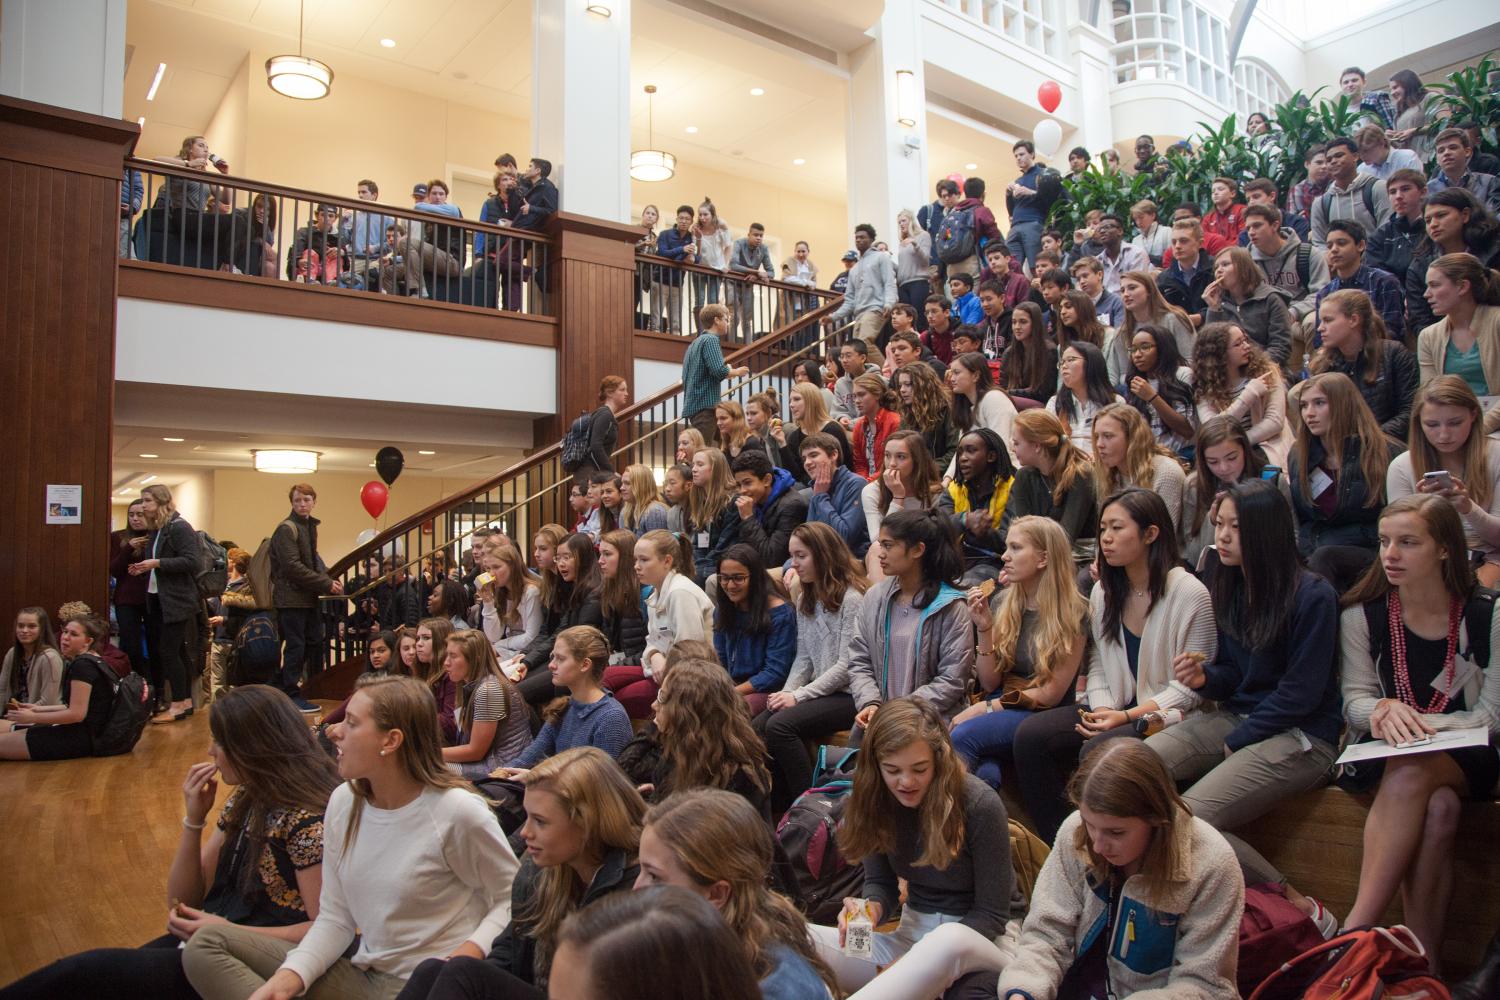 More than 120 admitted students revisited the School earlier this month.